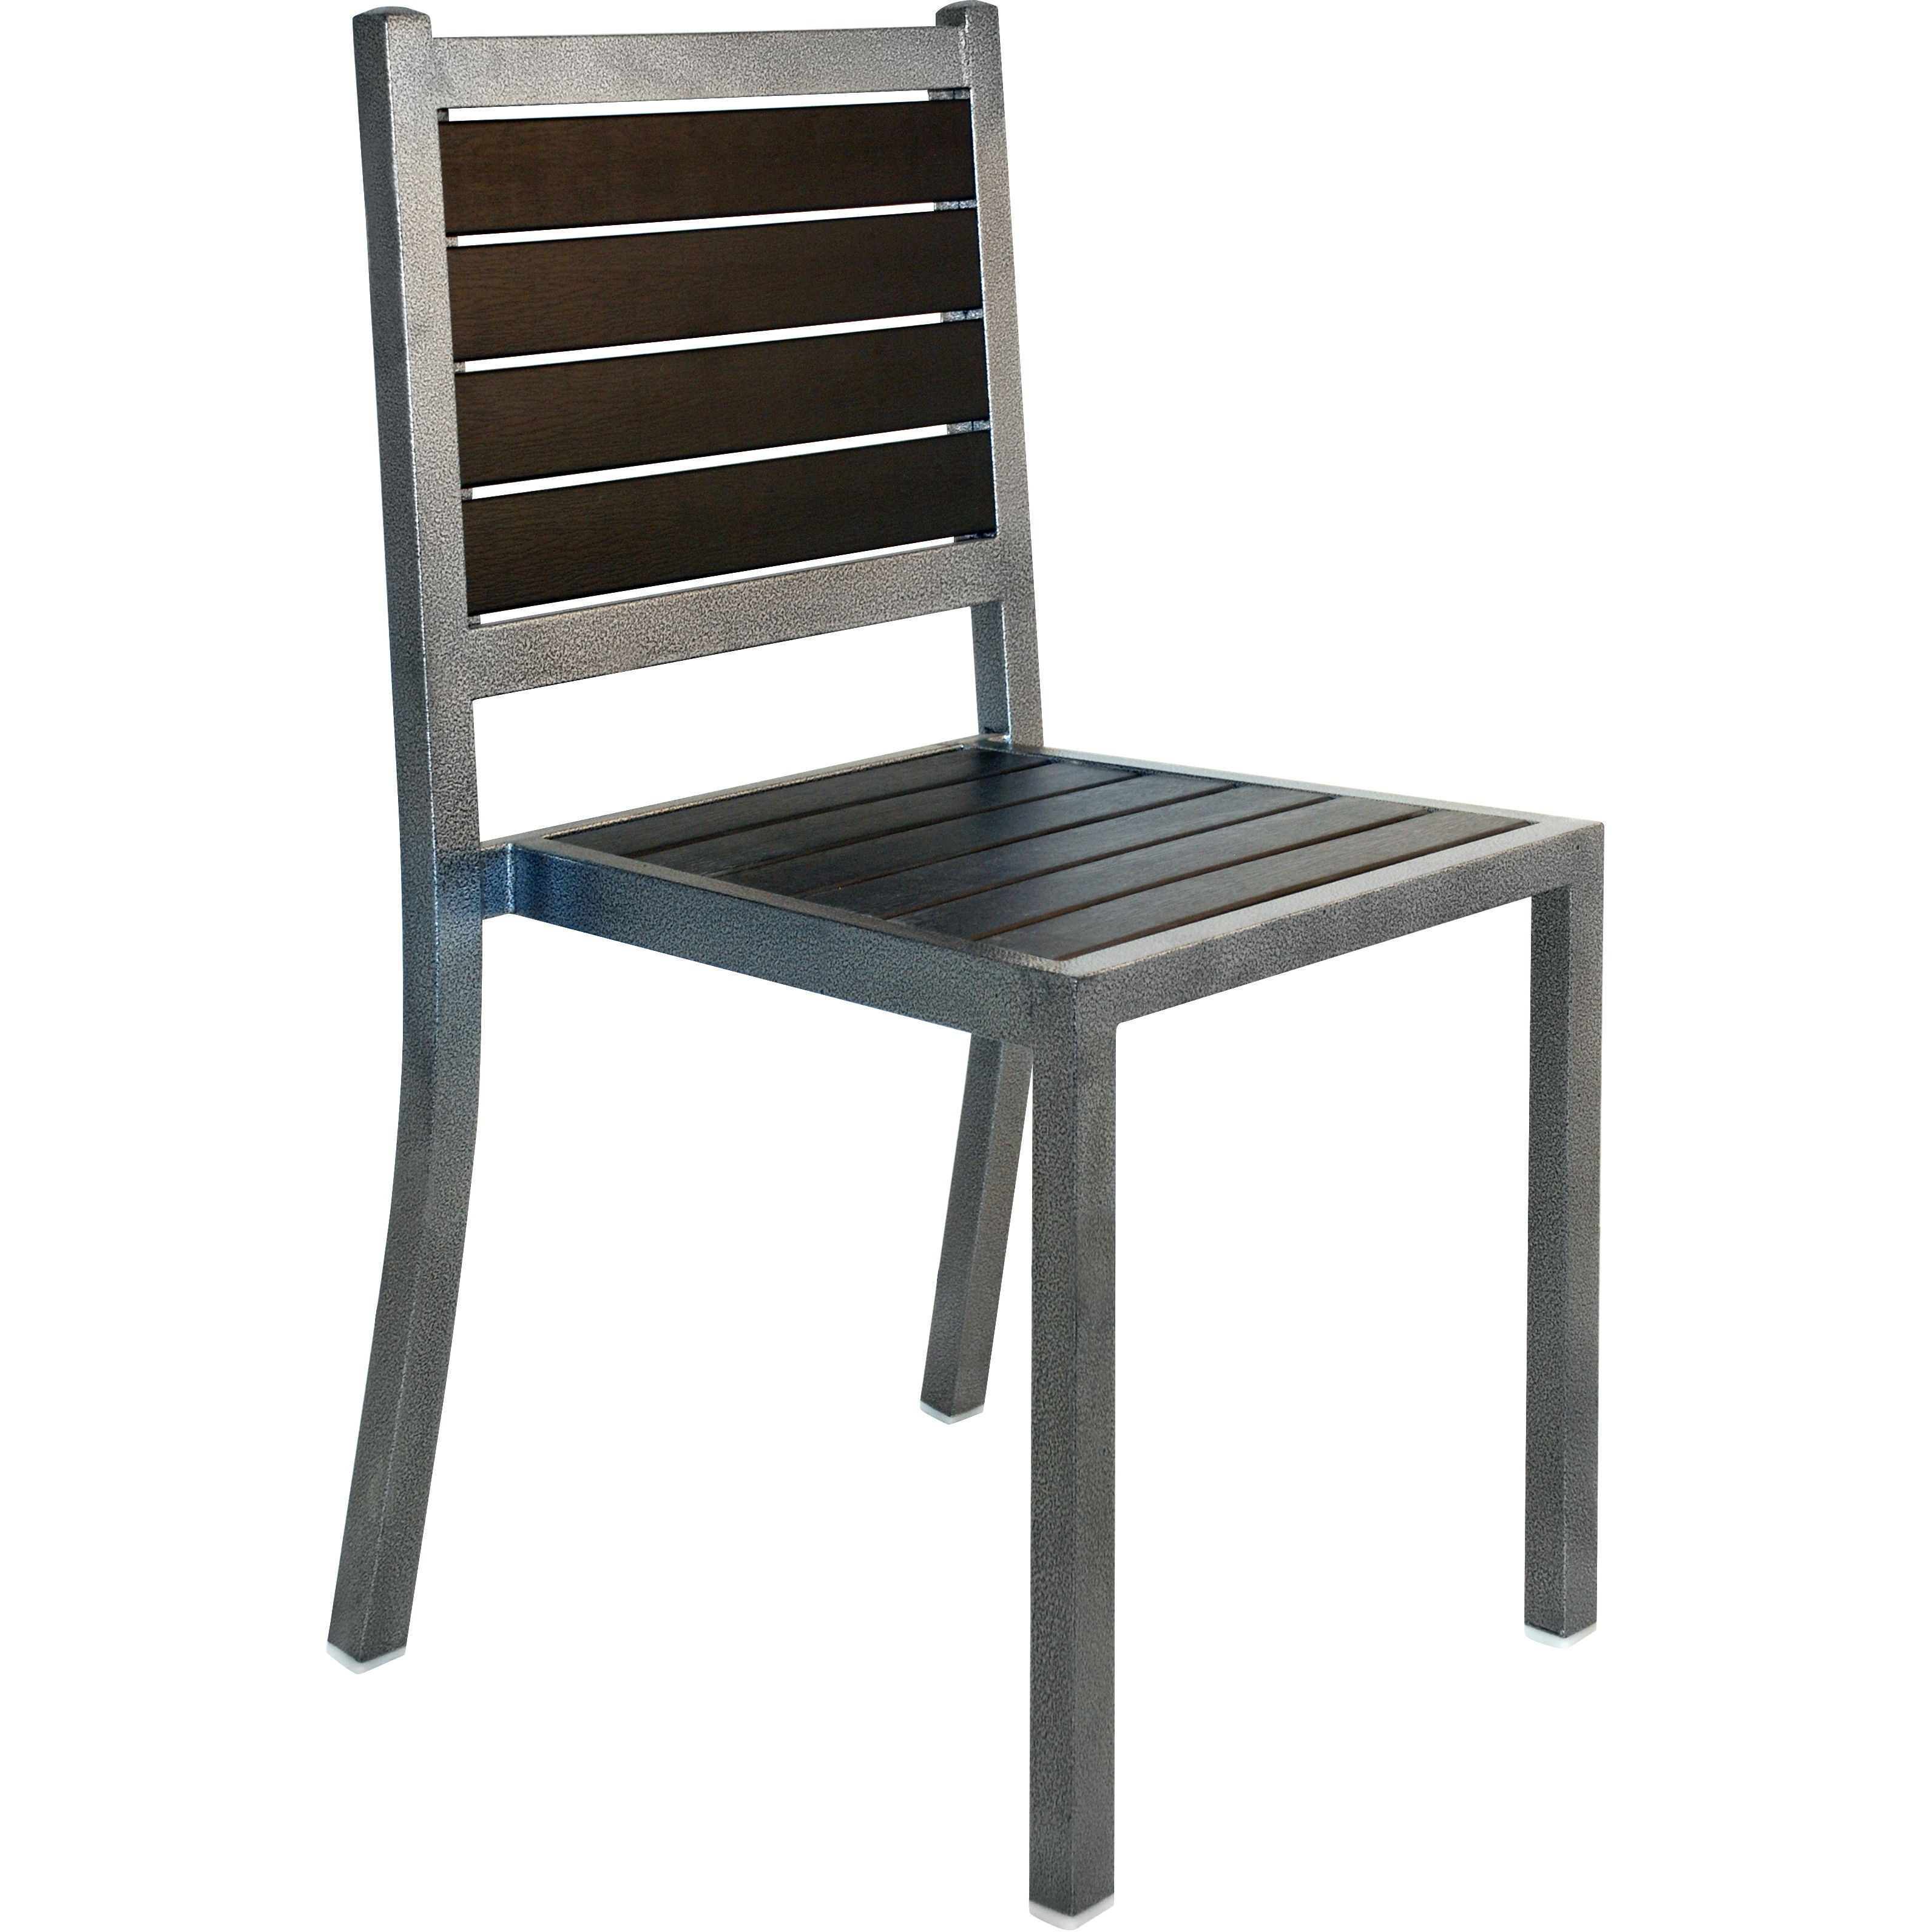 Best ideas about Patio Furniture Chairs
. Save or Pin Plastic Teak Metal Patio Chair Now.